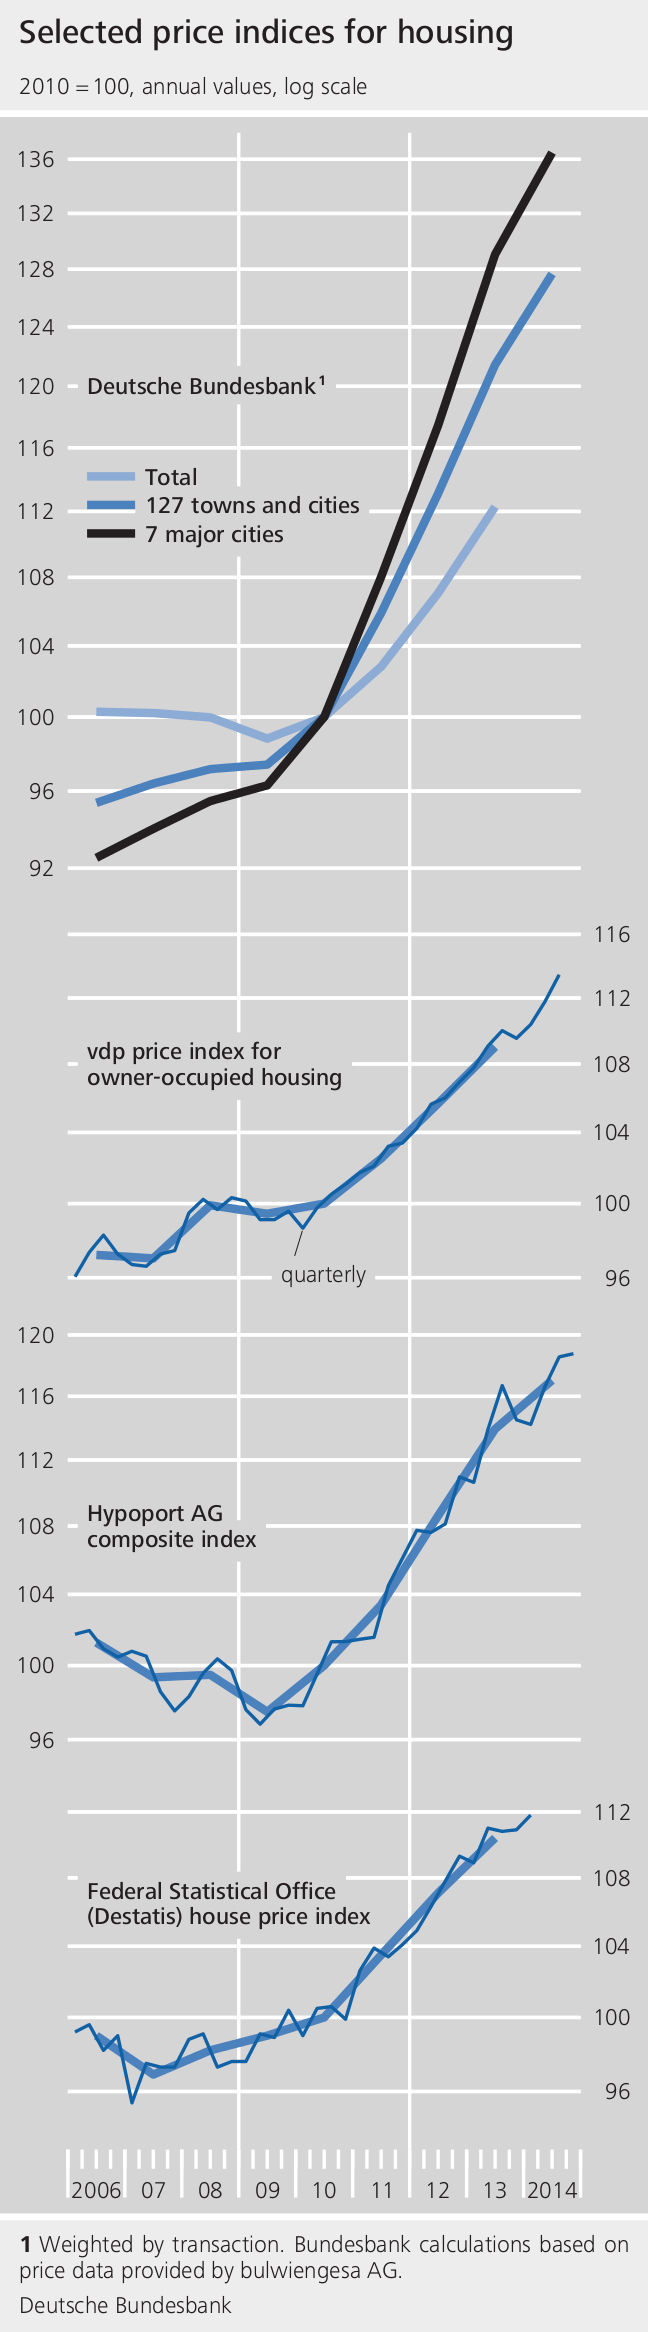 Graphic for selected price indices of housing